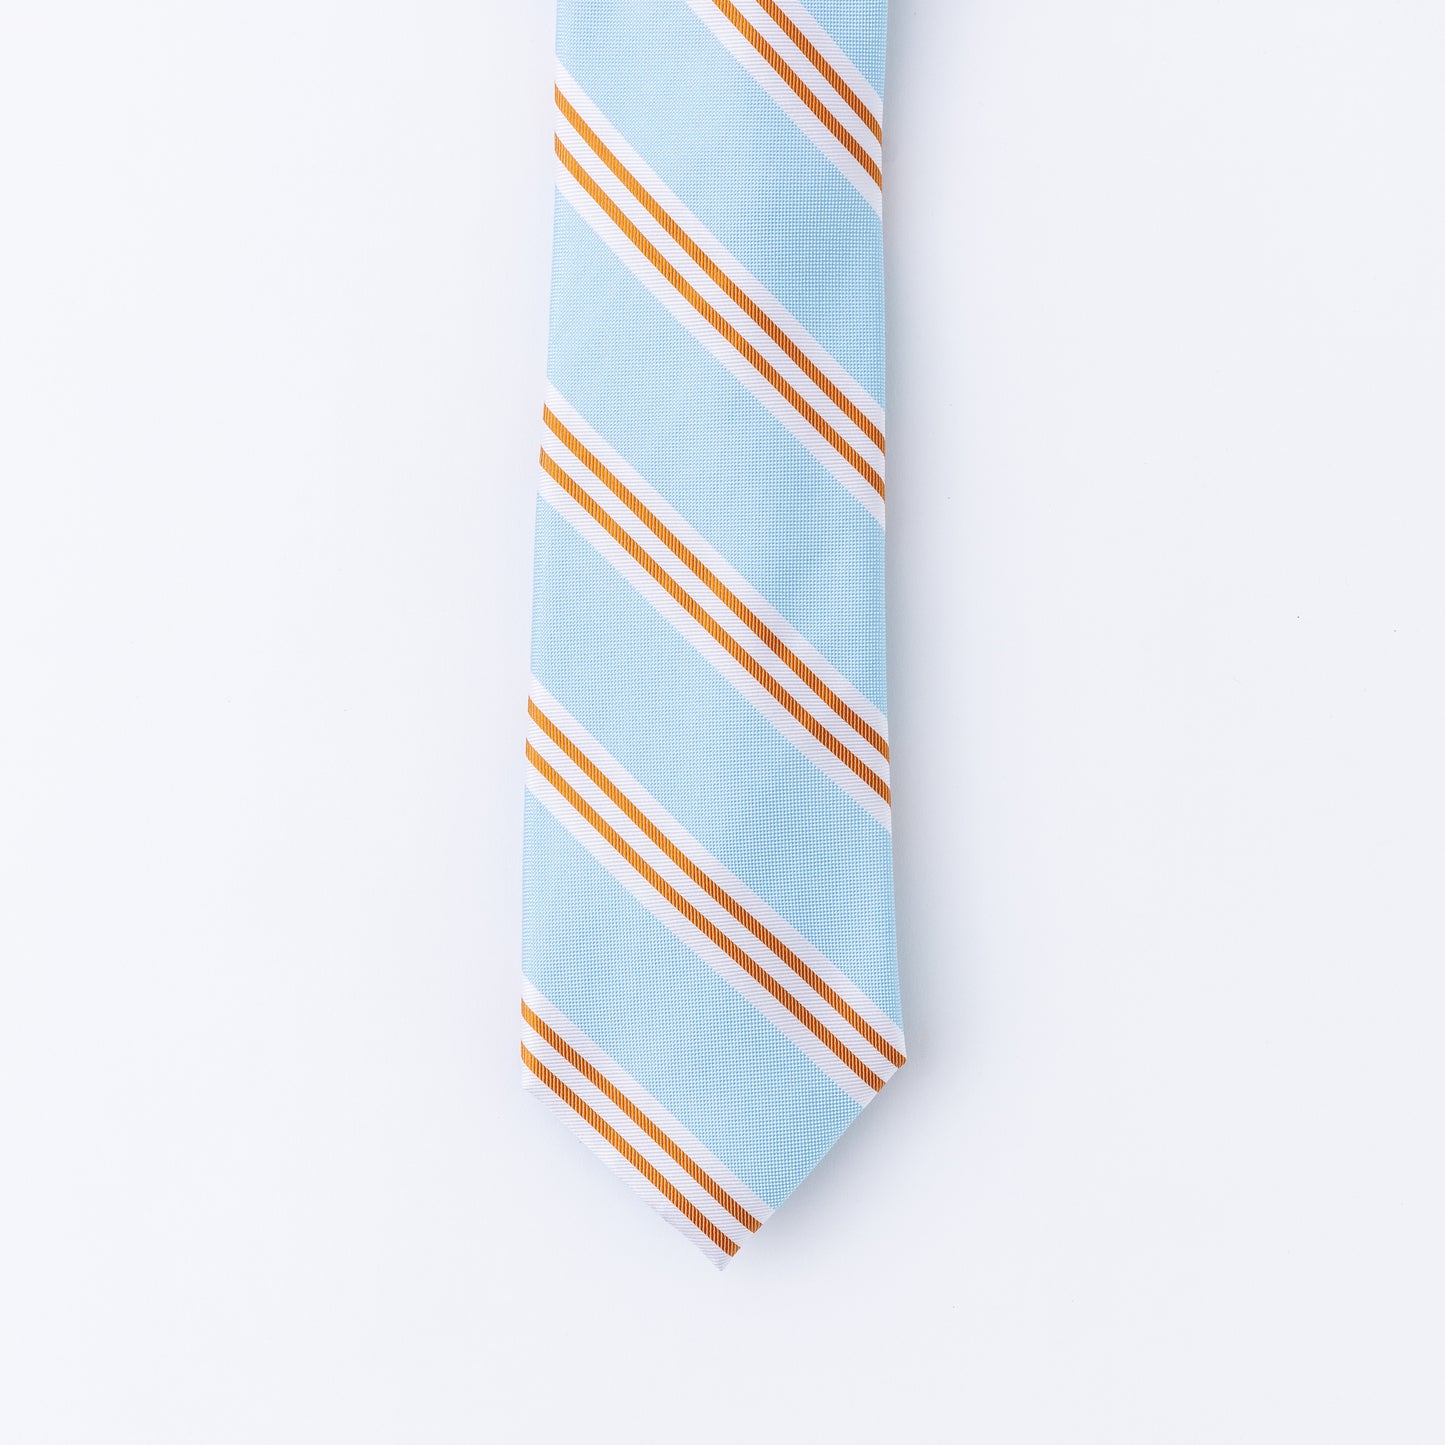 Fresno Tie - 2 Colors Available